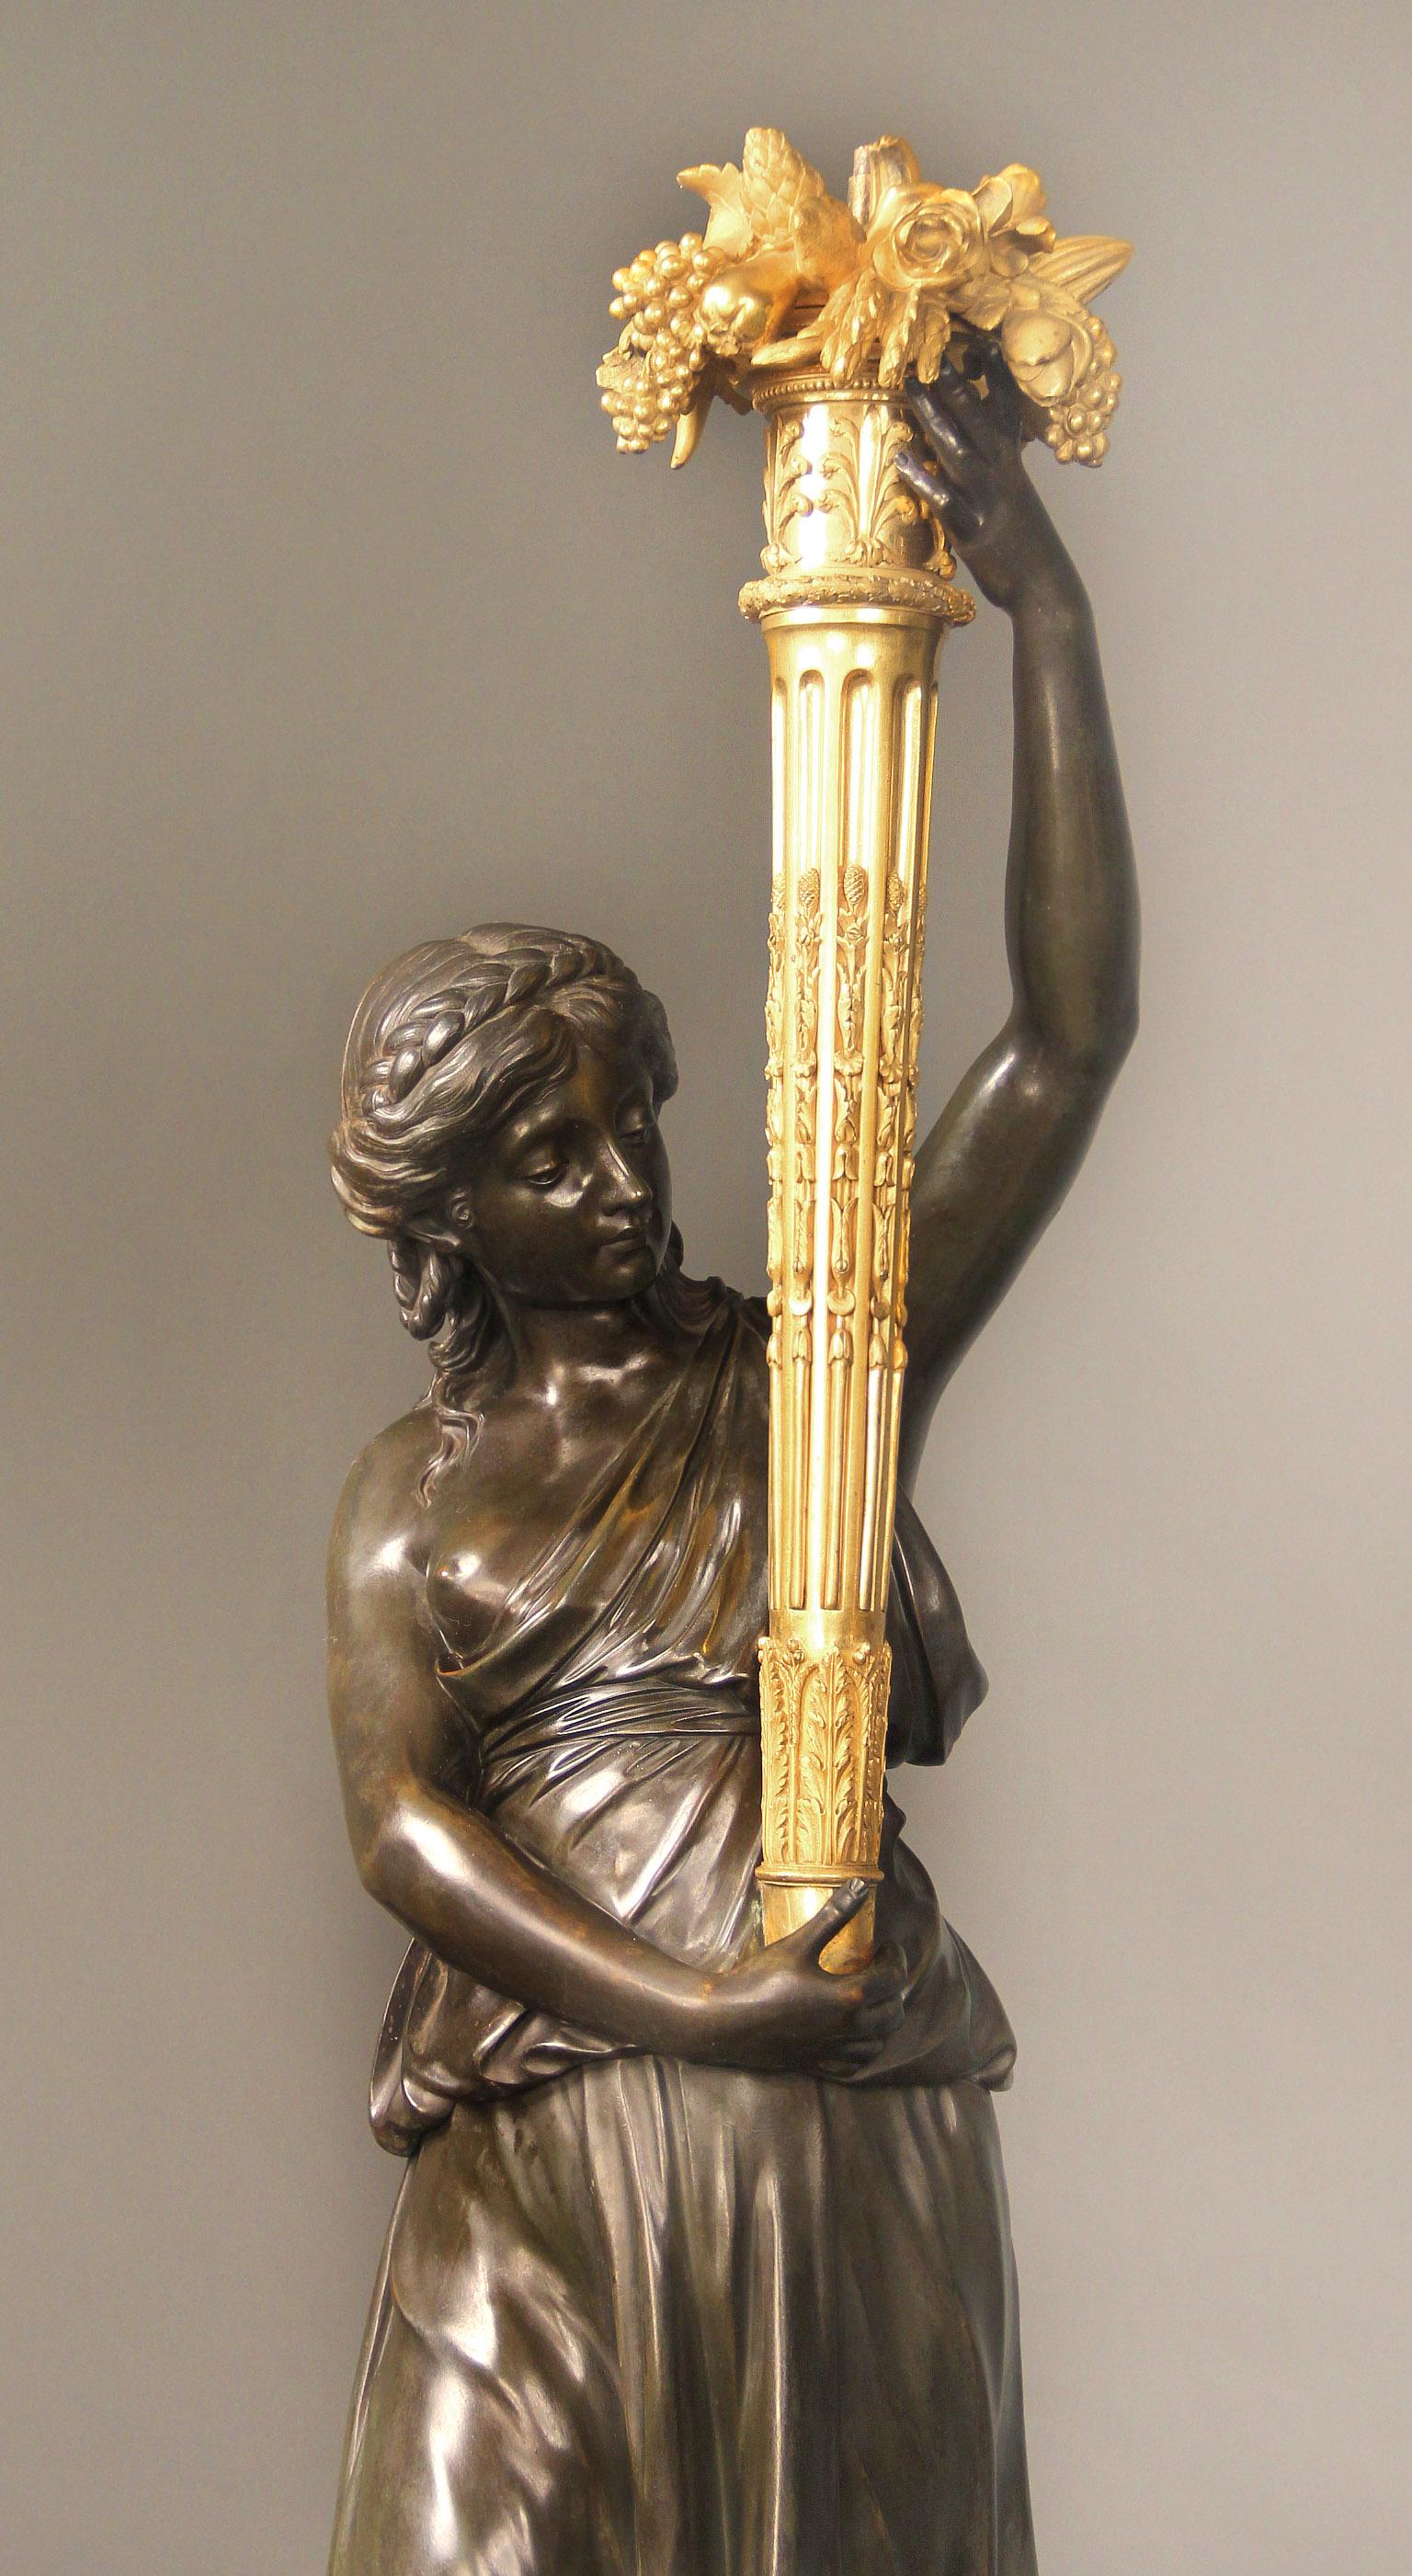 A Museum Quality pair of late 19th century gilt and patinated bronze figural candelabra by Henry Dasson

Henry Dasson

Each cast as a scantily clad beauty holding aloft a gilt torchere decorated with fruit, flowers and foliage, mounted on a